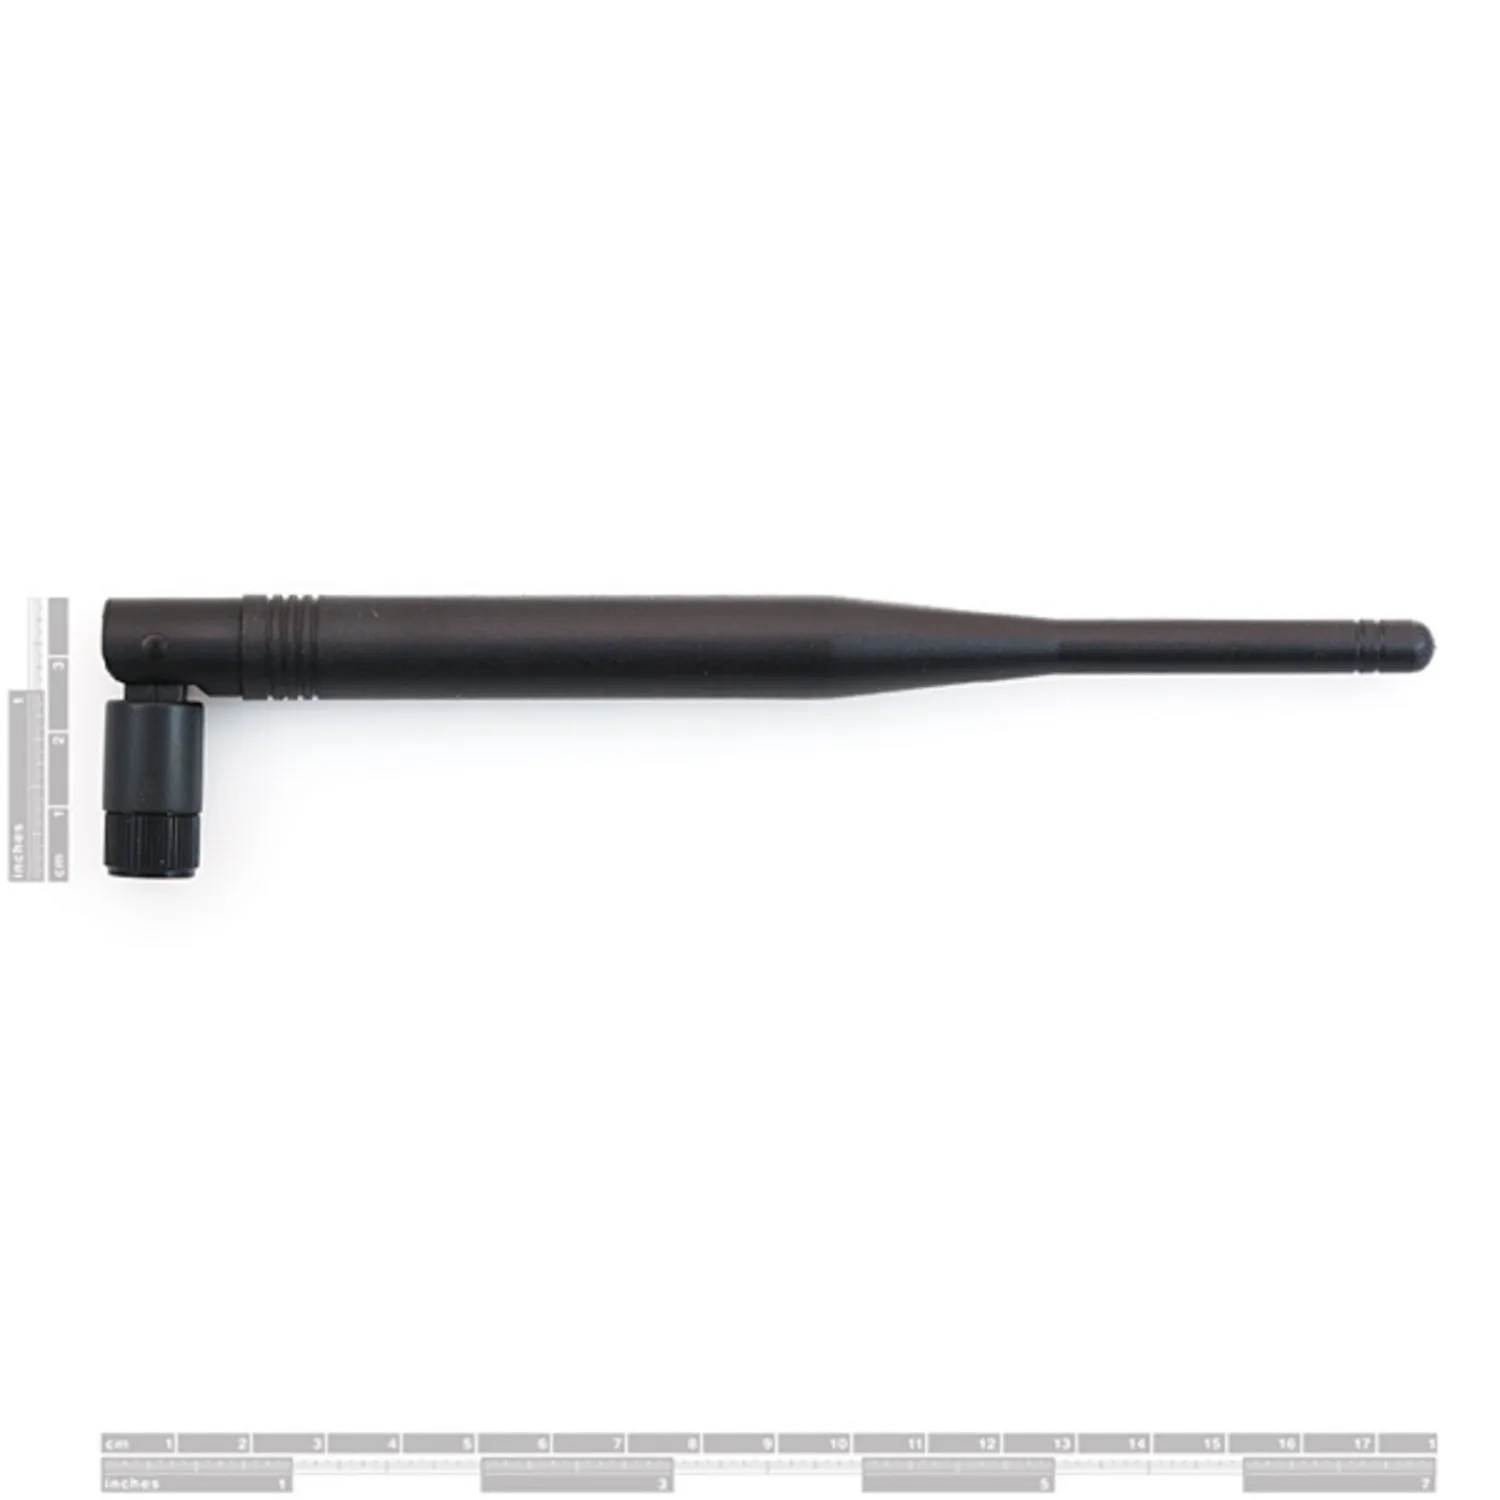 Photo of 2.4GHz Duck Antenna RP-SMA - Large